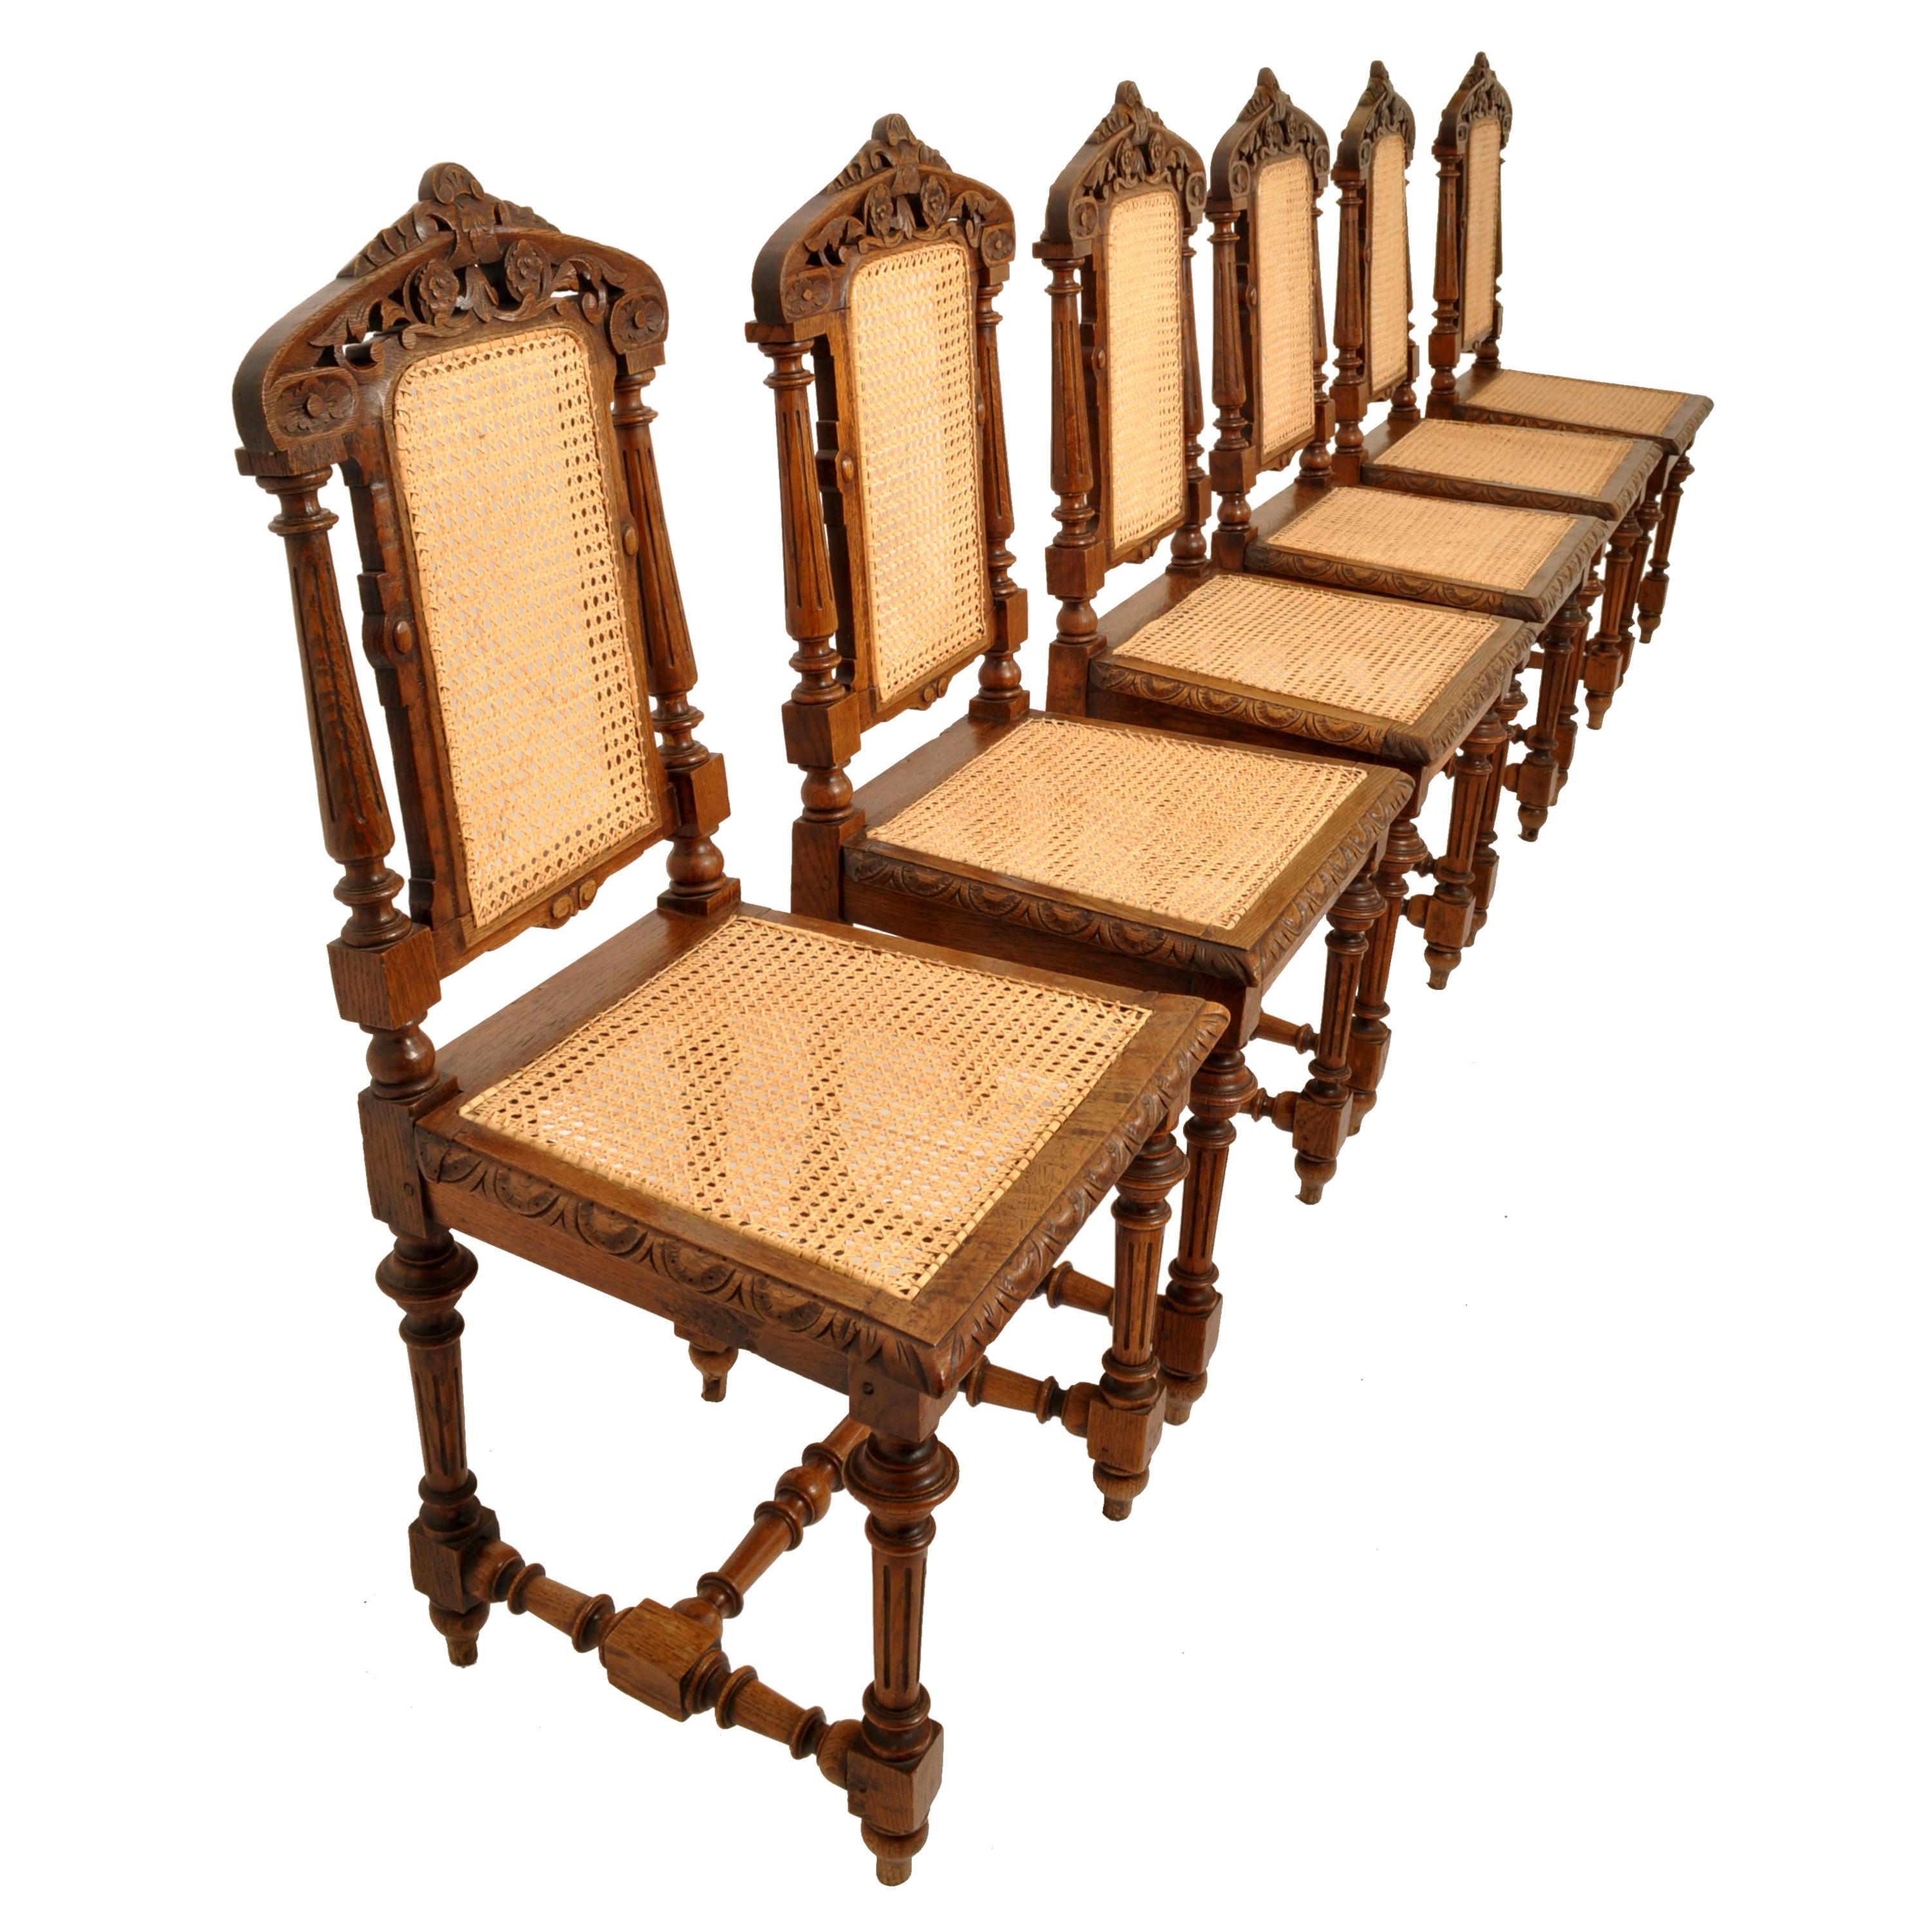 A very good set of antique French carved oak Henri II dining chairs, Circa 1880.
The chairs have just been completely & professionally re-caned by hand, each chair has also been completely re-glued and clamped in bloomsbury's workshops, the chairs